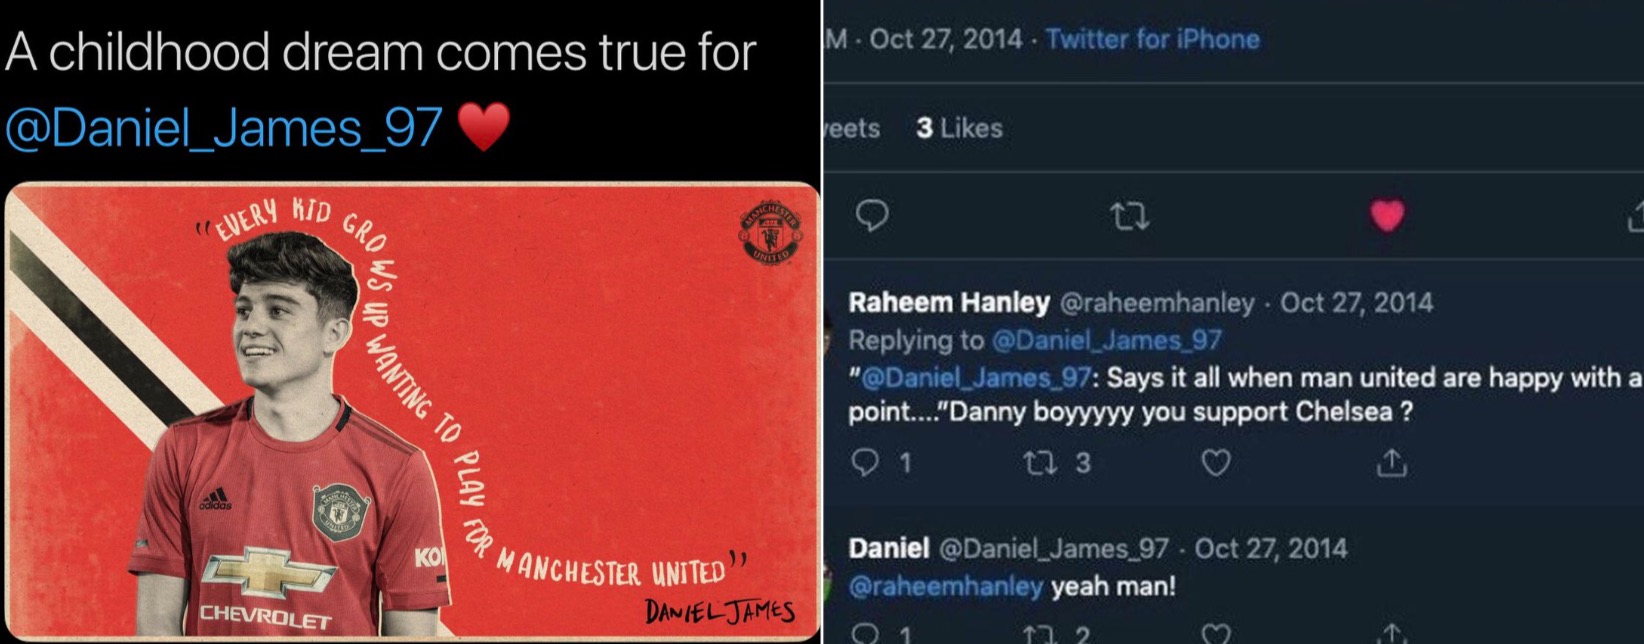 Old tweets from Daniel James showing support for Chelsea surface online after Man Utd transfer